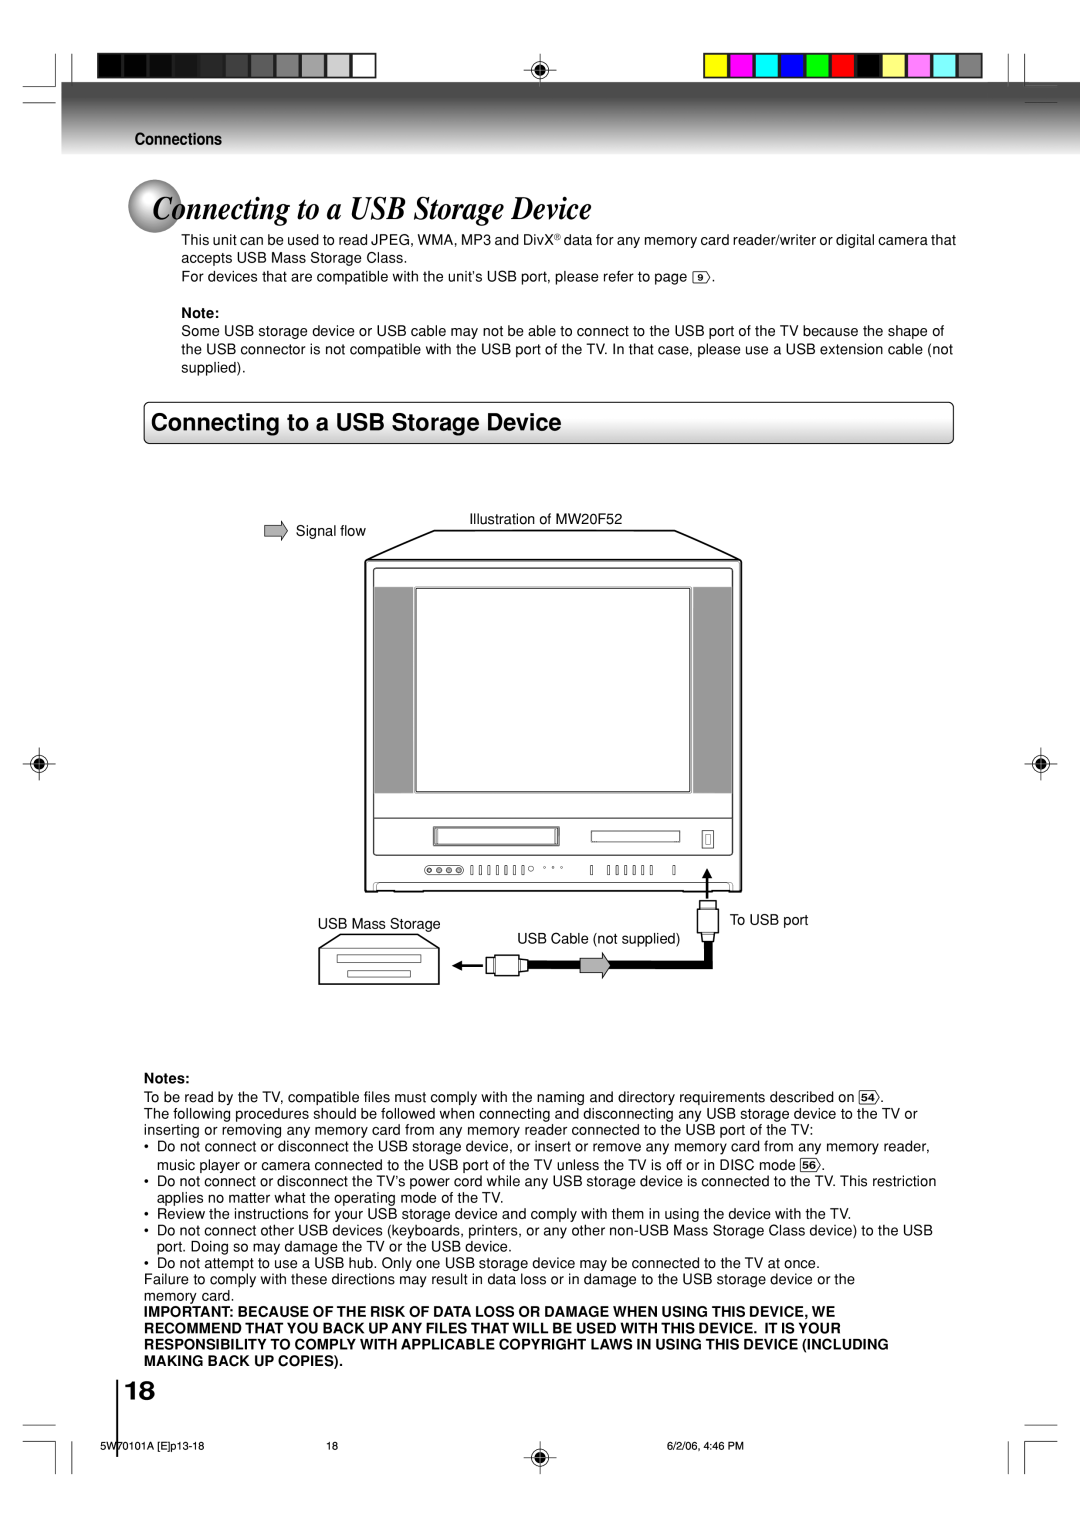 Toshiba MW24F52, MW20F52 owner manual Connecting to a USB Storage Device, Connections 